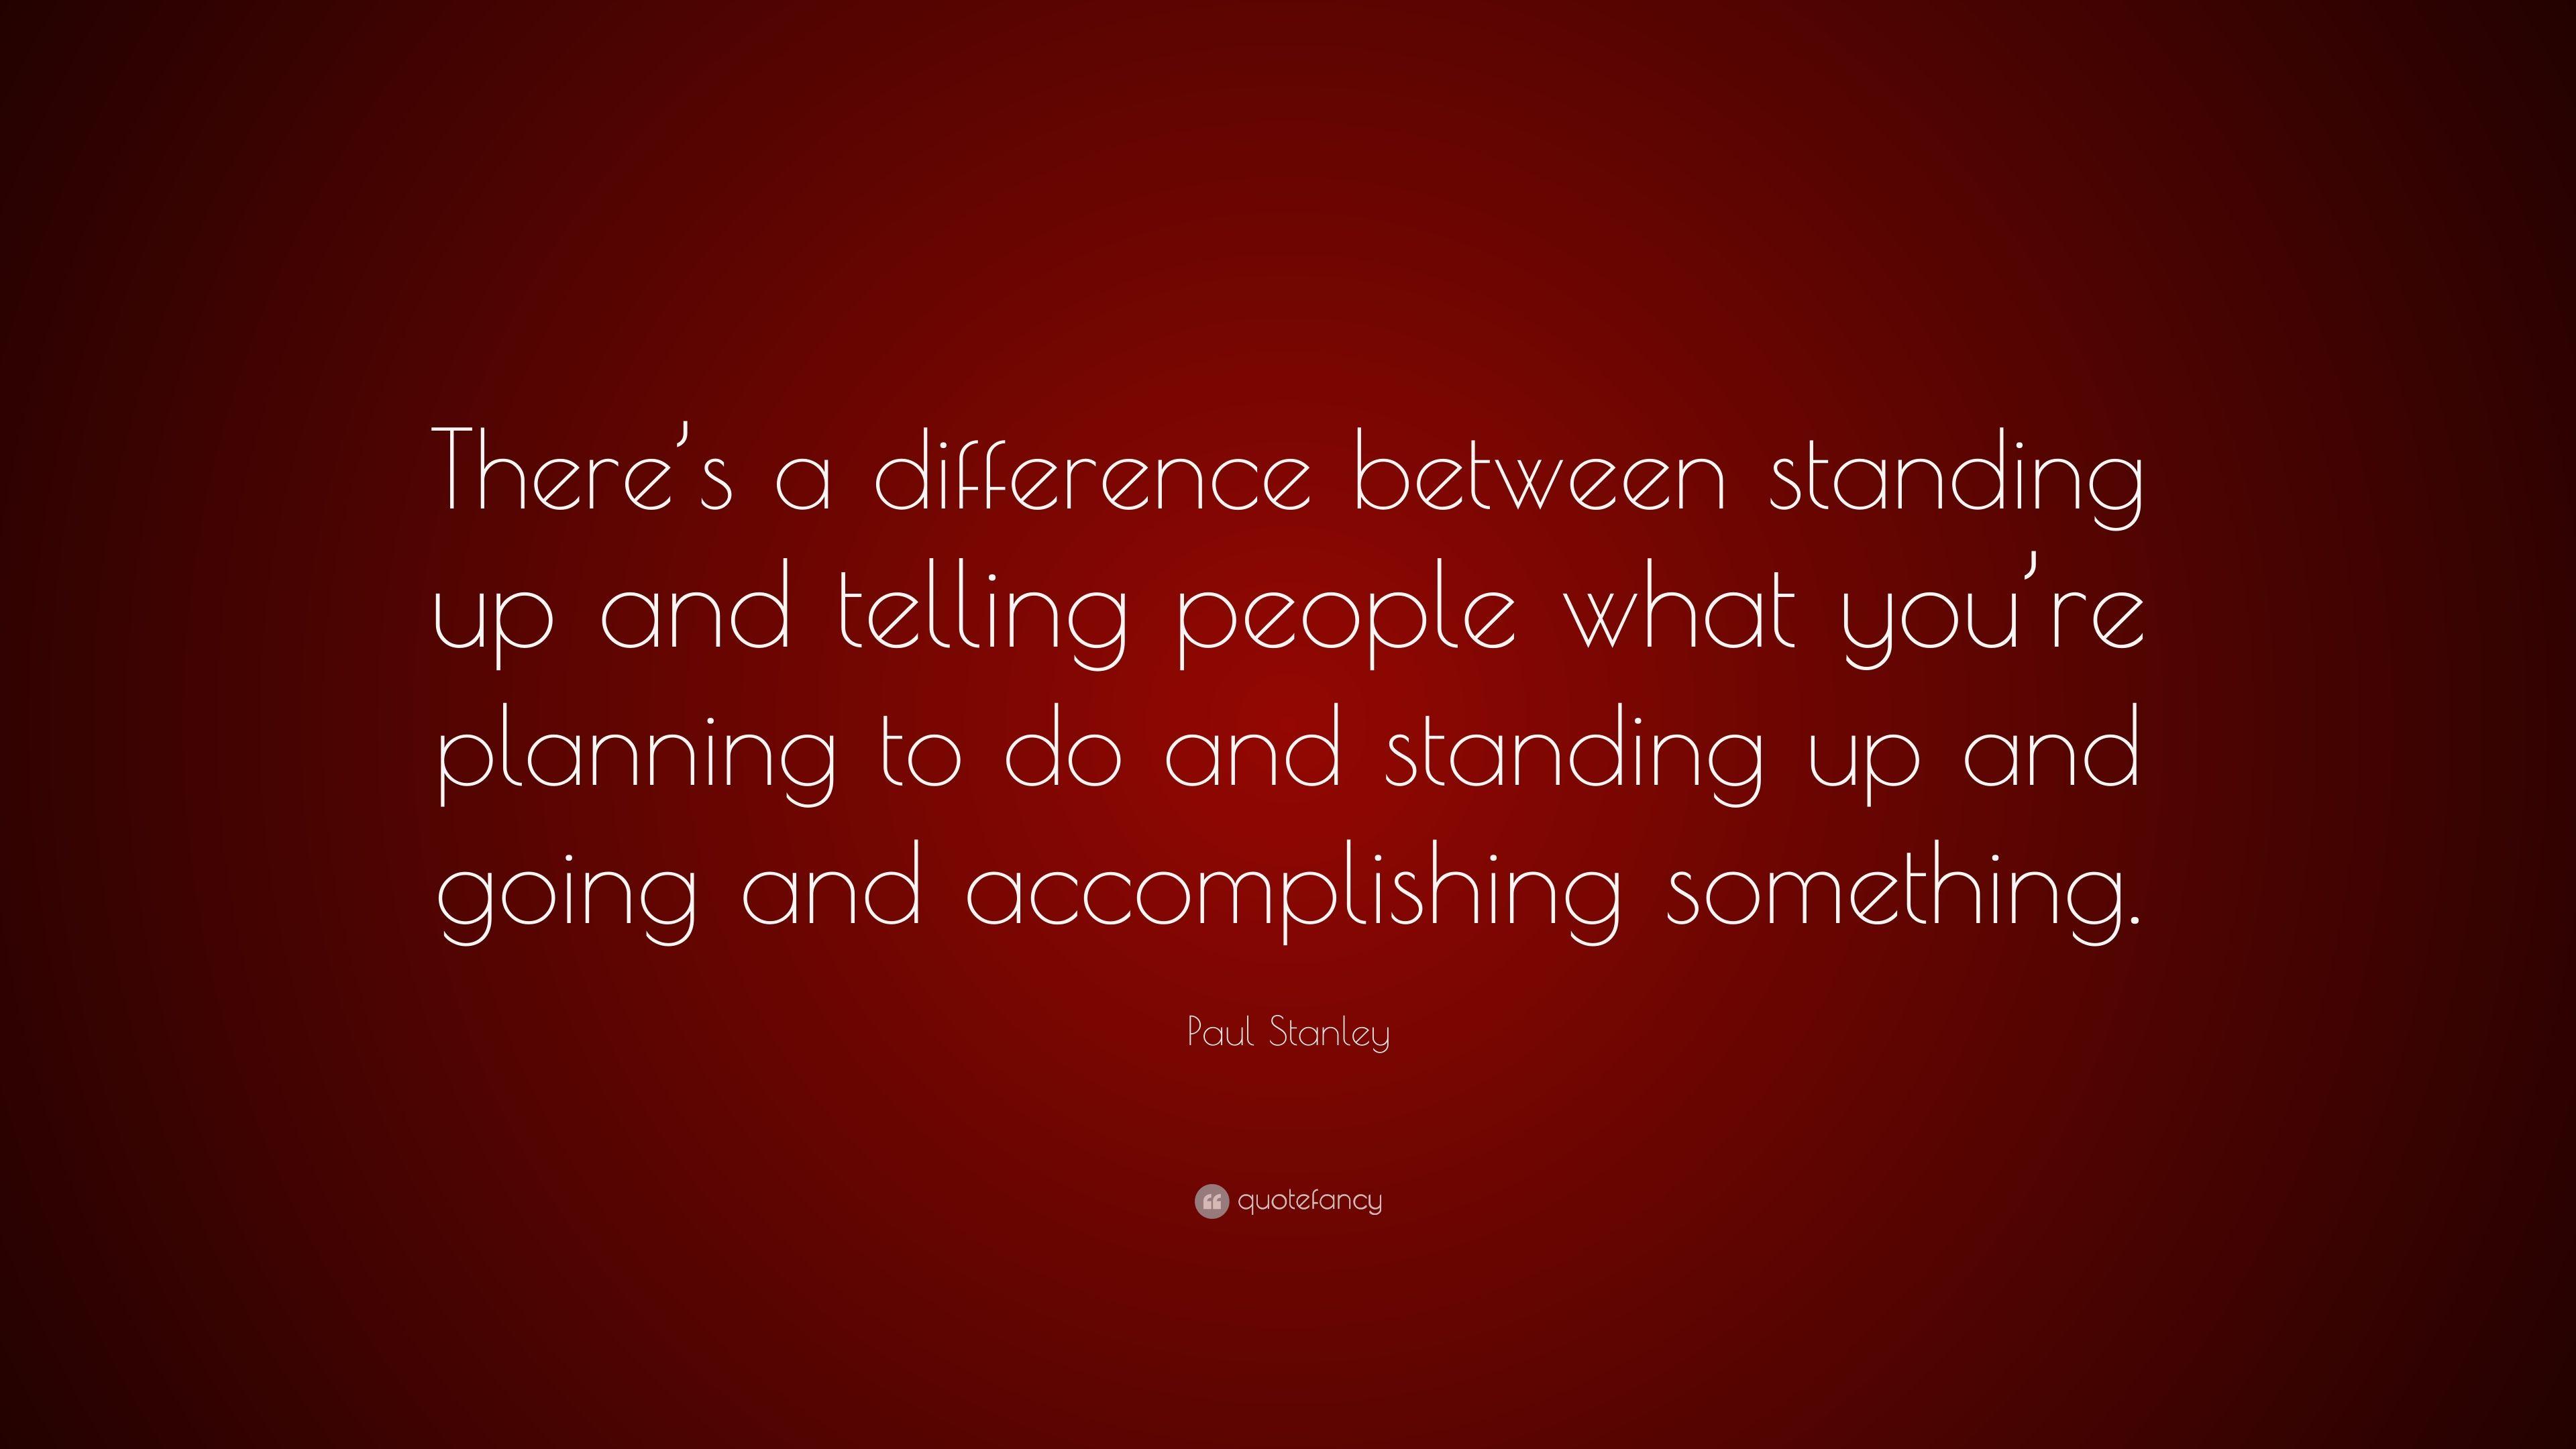 Paul Stanley Quote: “There's a difference between standing up